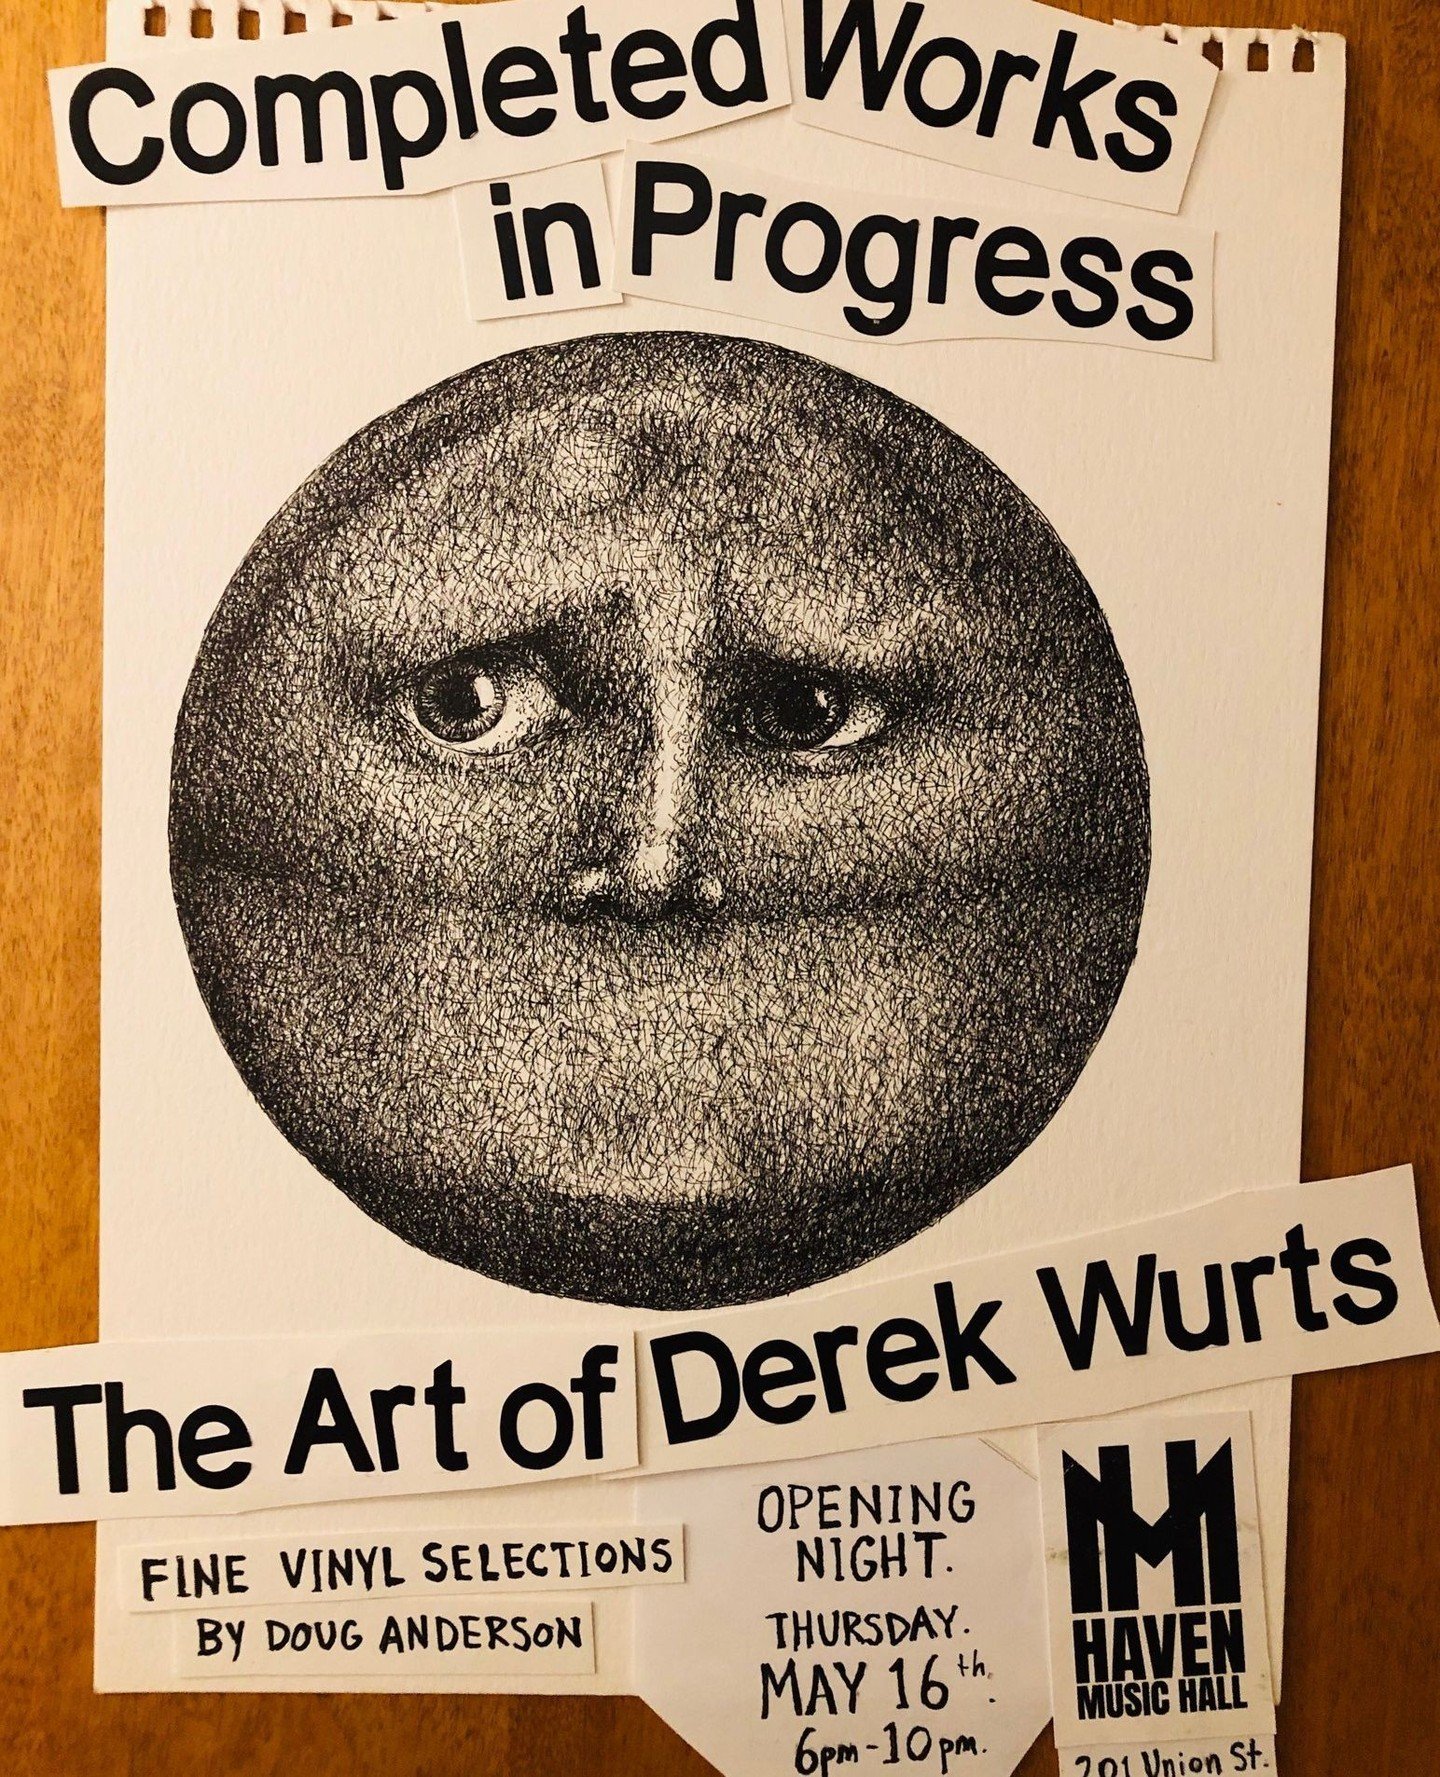 Join us to celebrate the opening of Derek Wurts' show &quot;Completed Works In Progress&quot; on May 16th from 6pm-10pm, with Doug Anderson spinning vinyl. ⁠
⁠
Derek Wurts is a multidisciplinary, self-taught artist who lives and works in Saint John, 